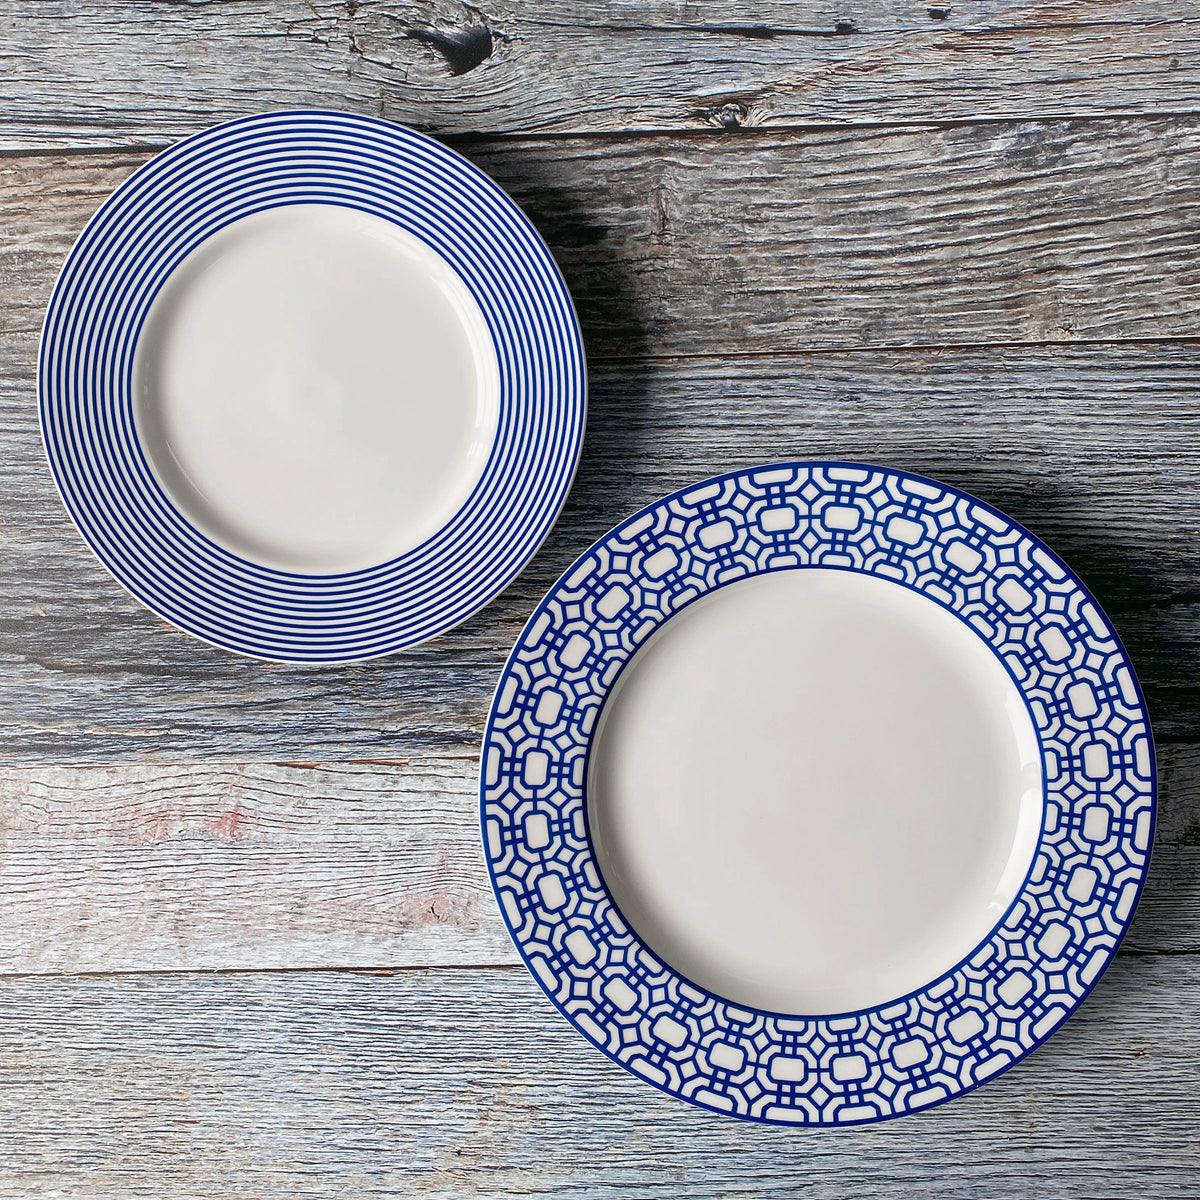 Two high-fired porcelain salad plates rest on a wooden surface. The left plate features the charming Newport Stripe Rimmed Salad Plate from Caskata Artisanal Home, while the right plate boasts a striking blue geometric pattern.